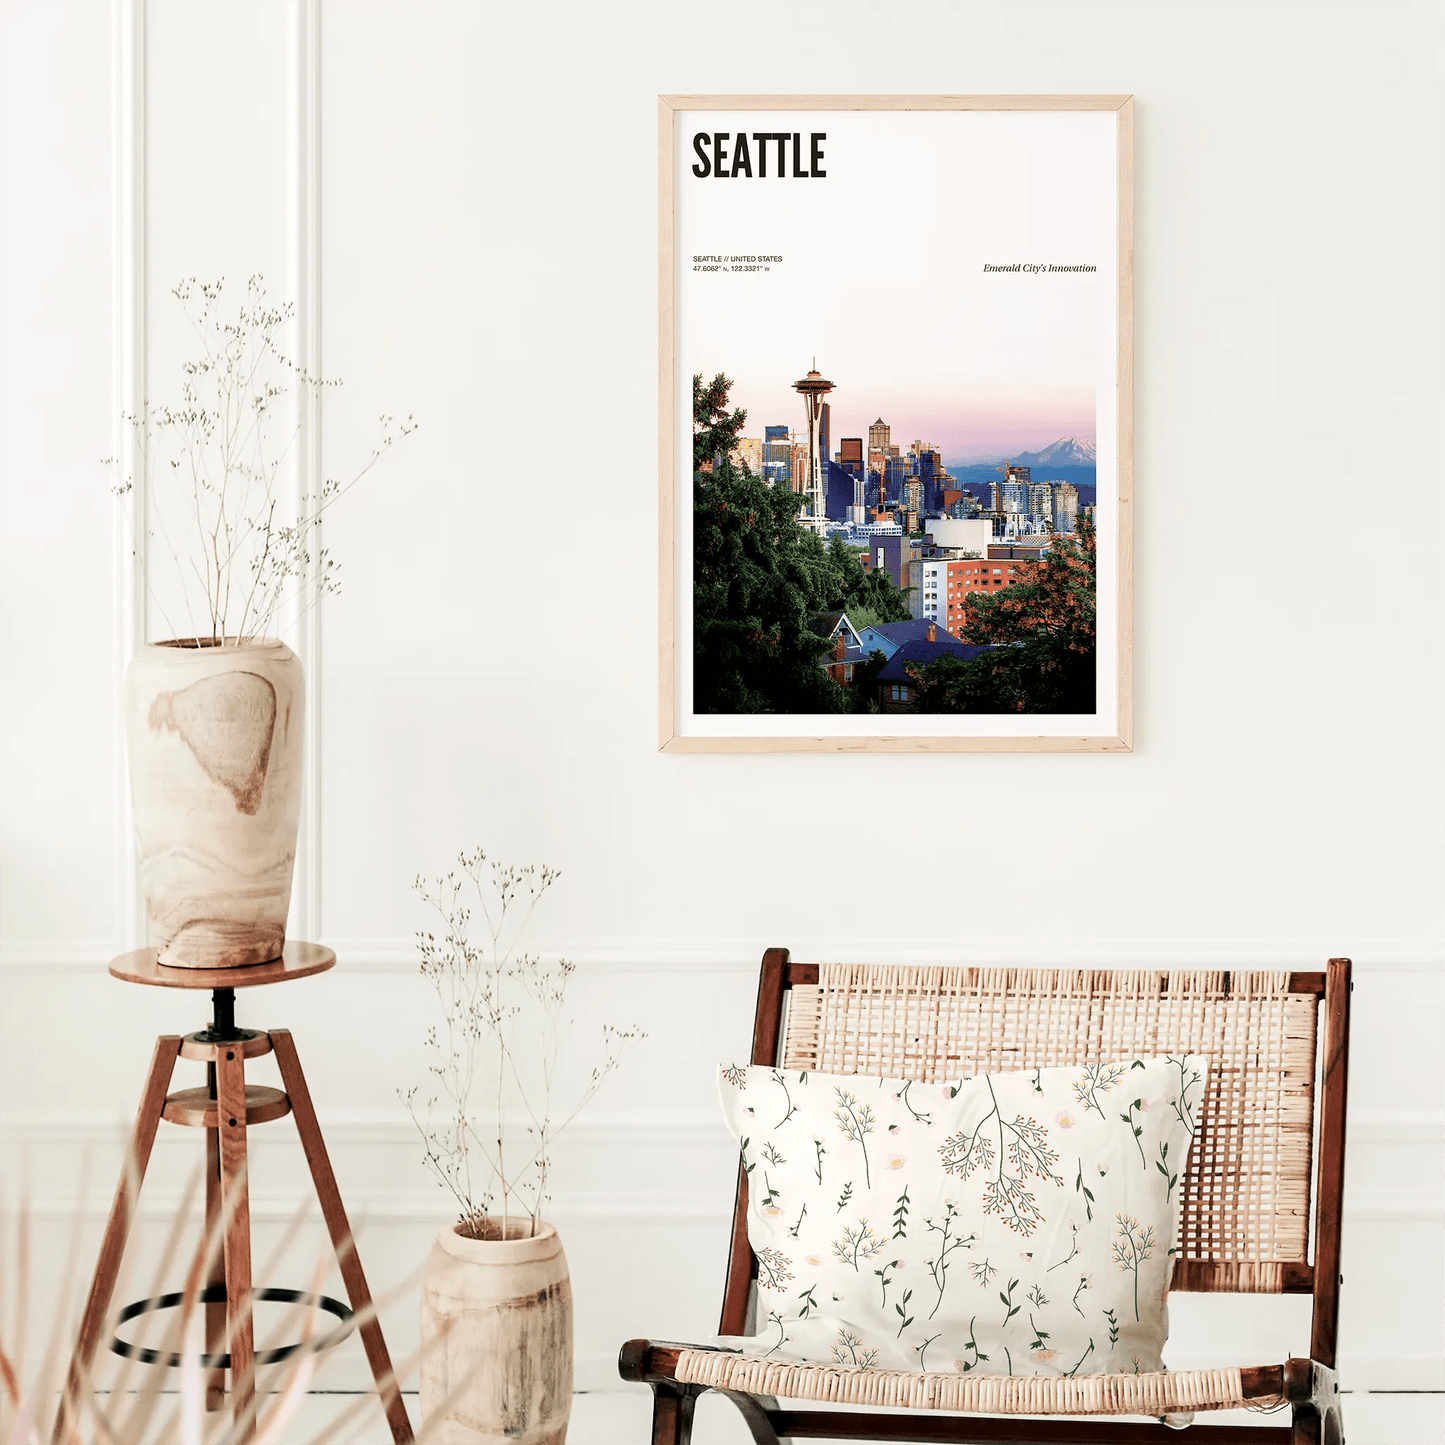 Seattle Odyssey Poster - The Globe Gallery